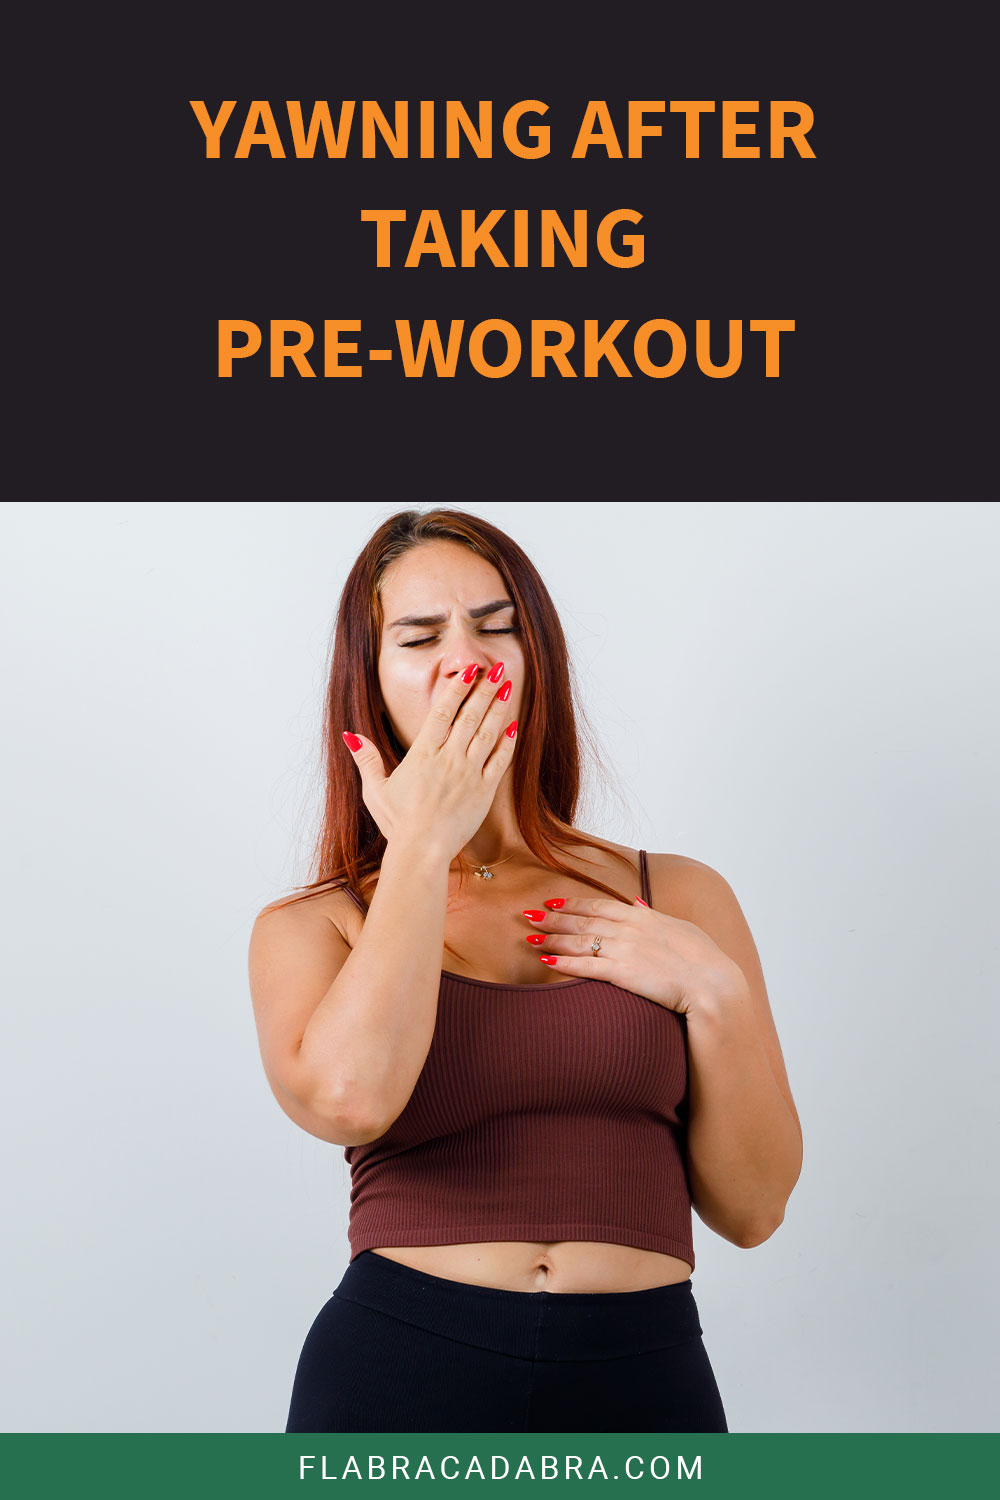 a woman yawning standing in front of a white wall - Yawning After Taking Pre-Workout